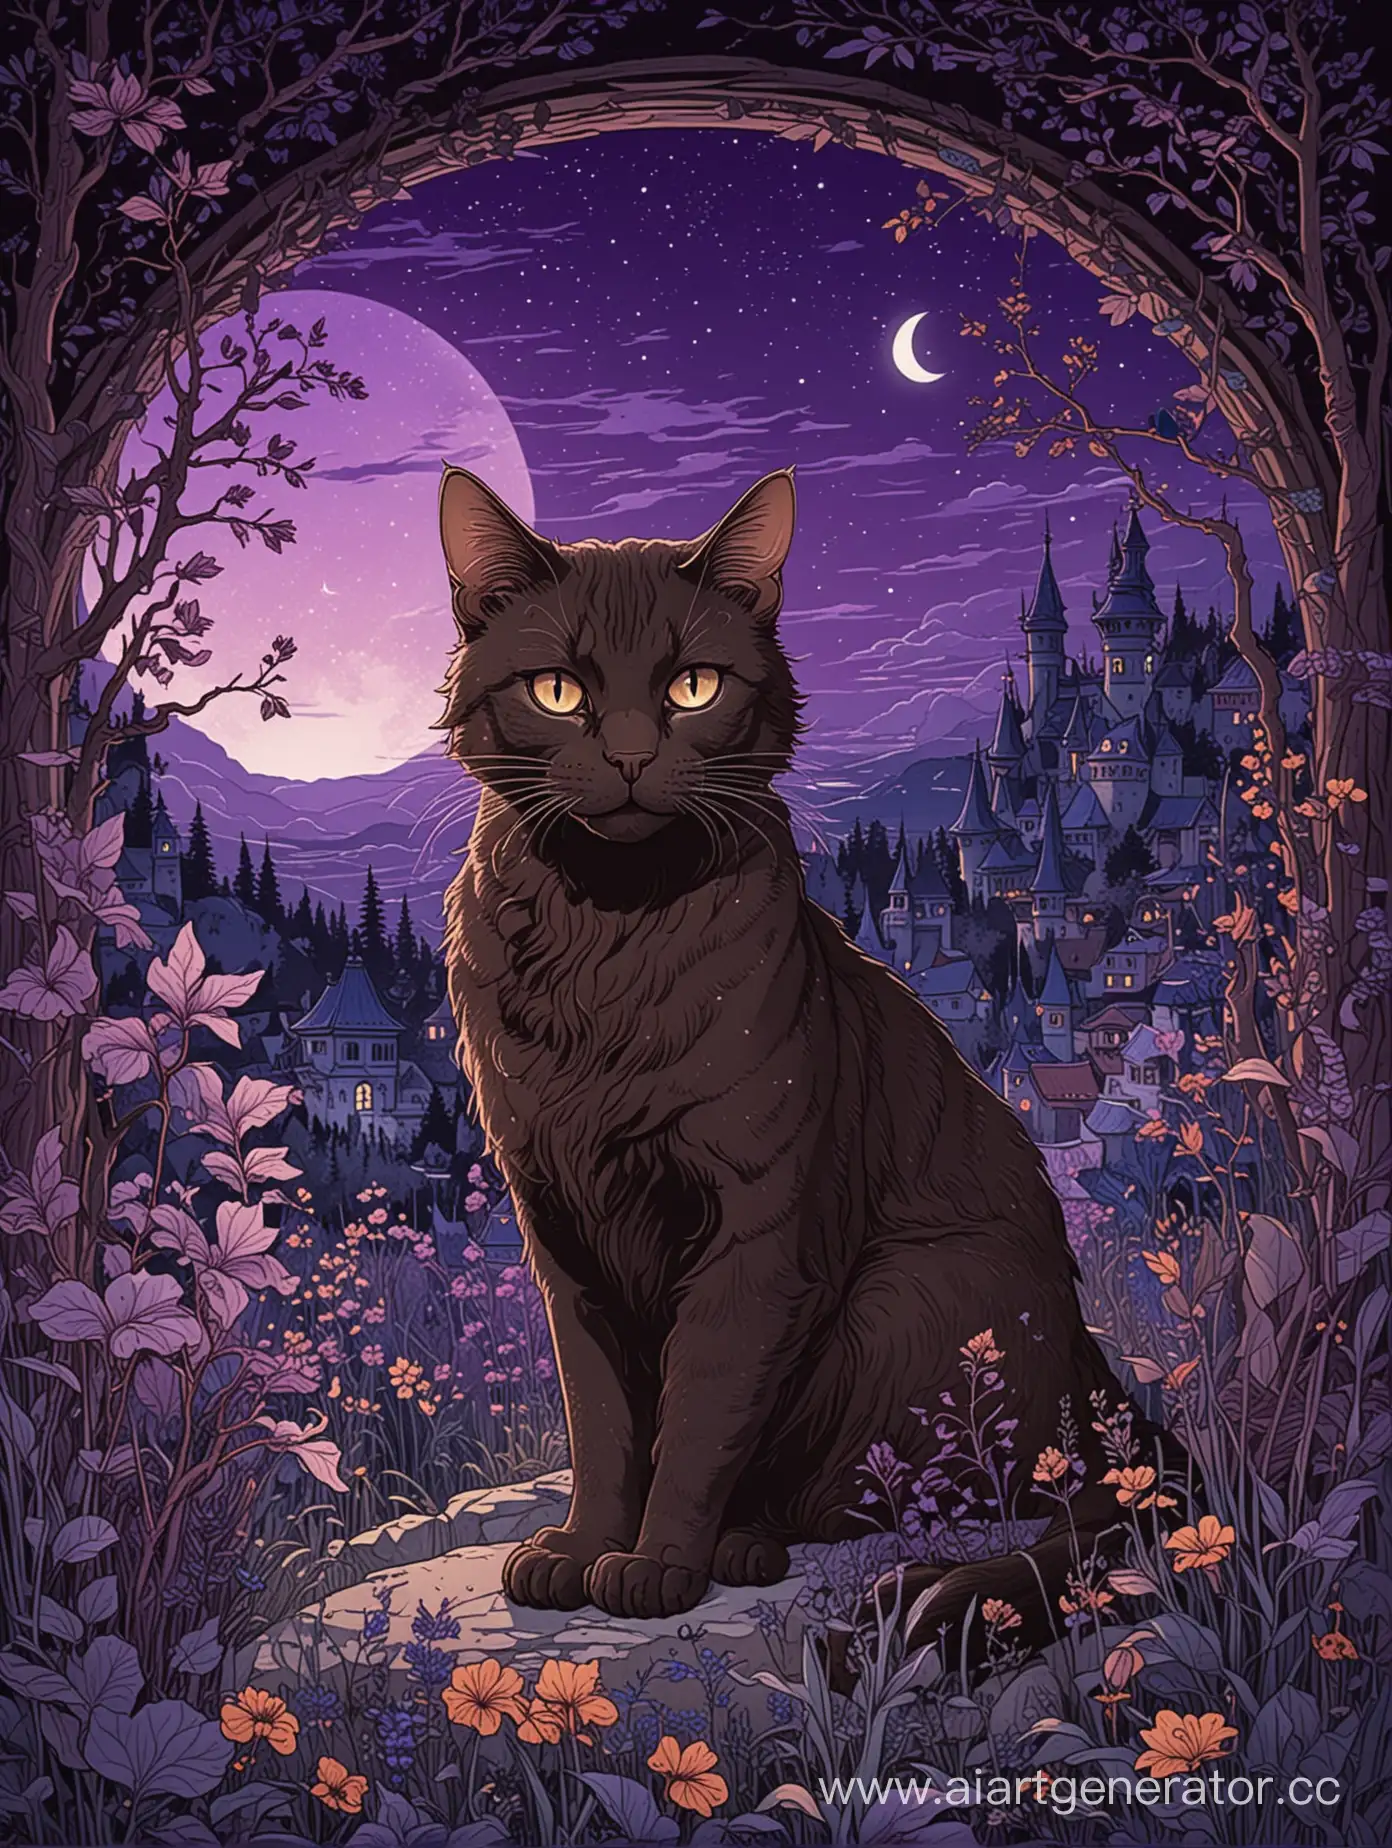 Bilibin-Style-Illustration-Mysterious-Night-with-Enigmatic-Cat